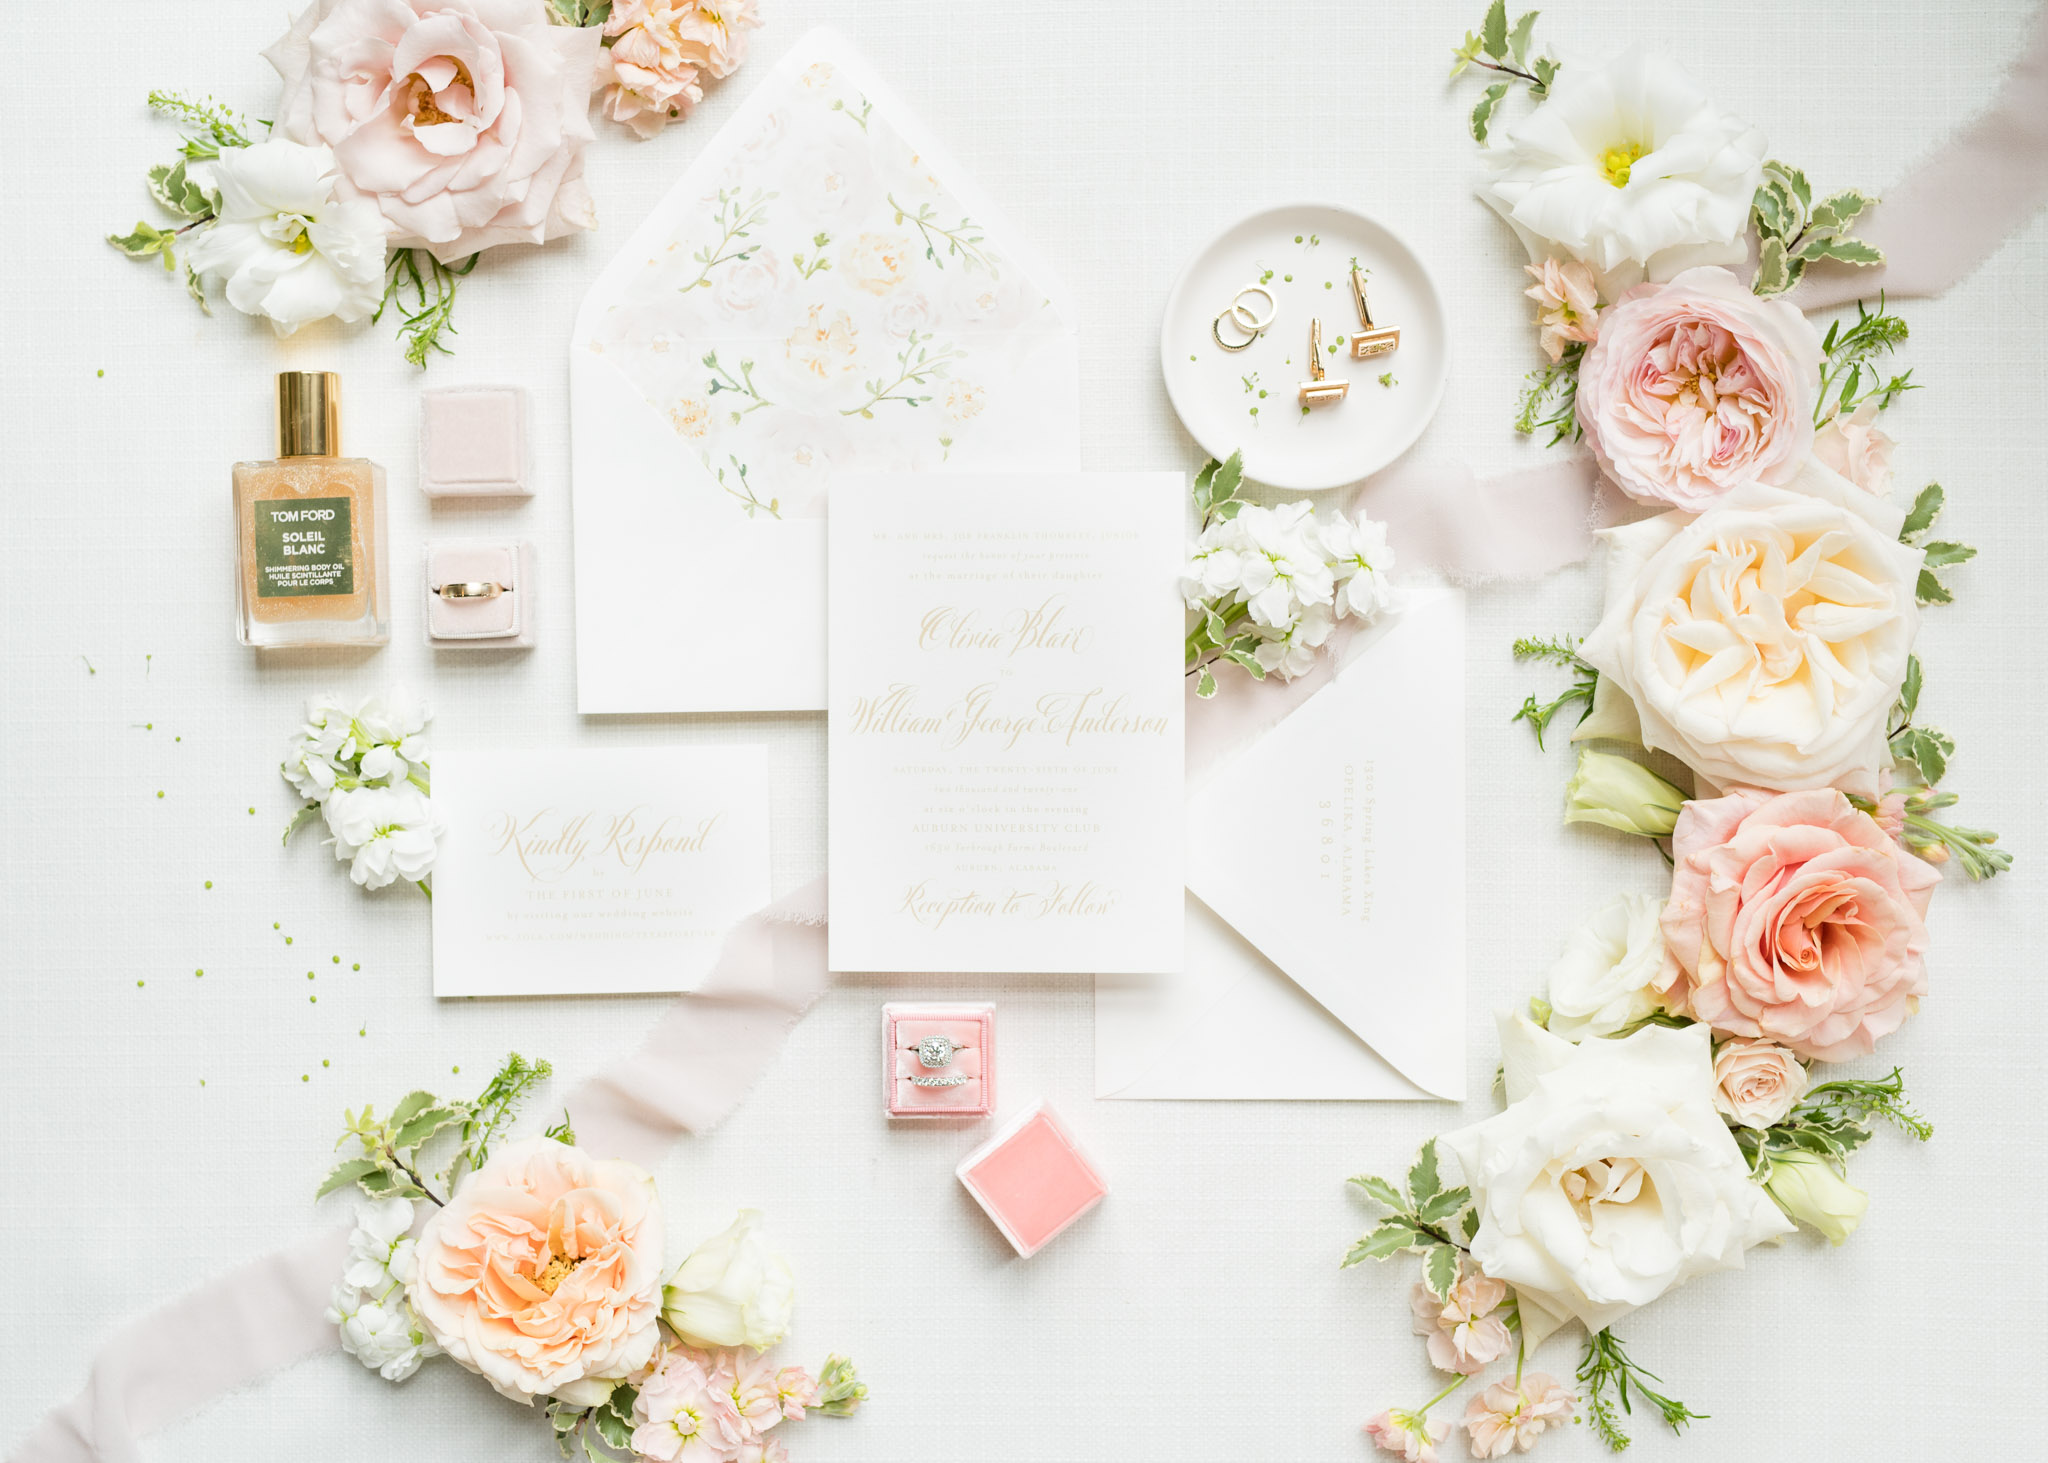 Wedding invitation suite sits with bridal details.